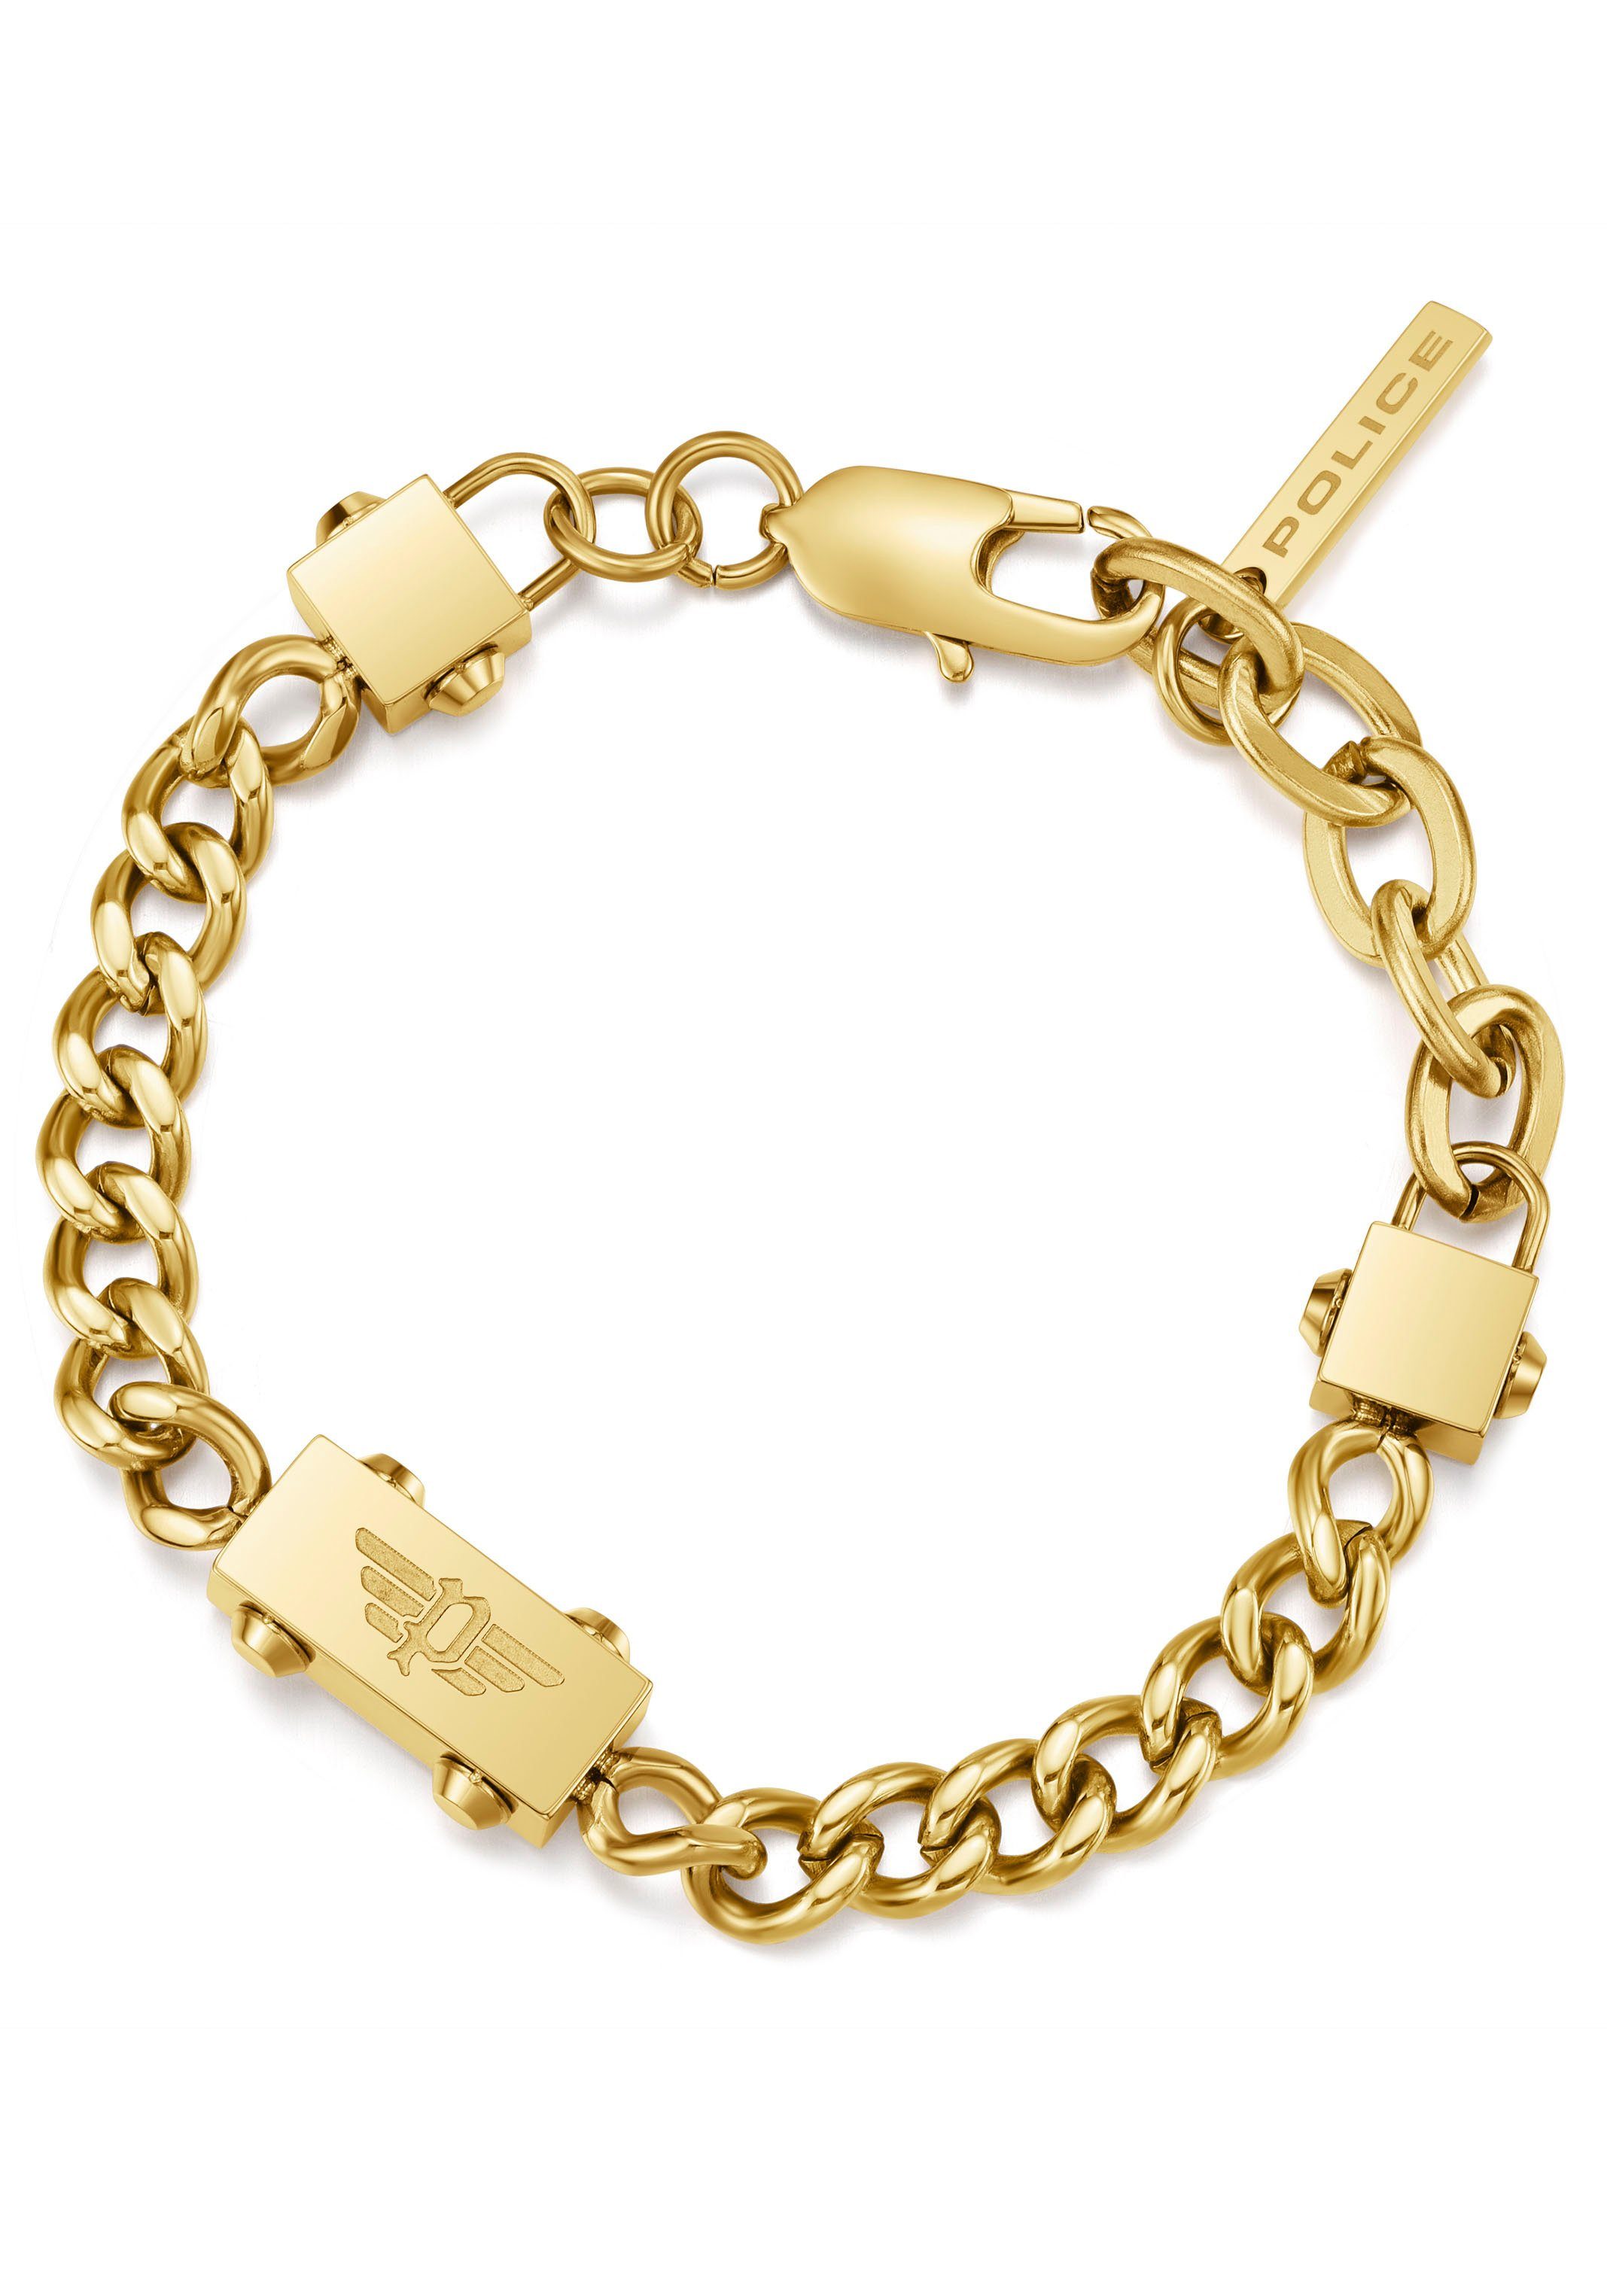 PEAGB0002106 PEAGB0002102, Armband Police gelbgoldfarben CHAINED,